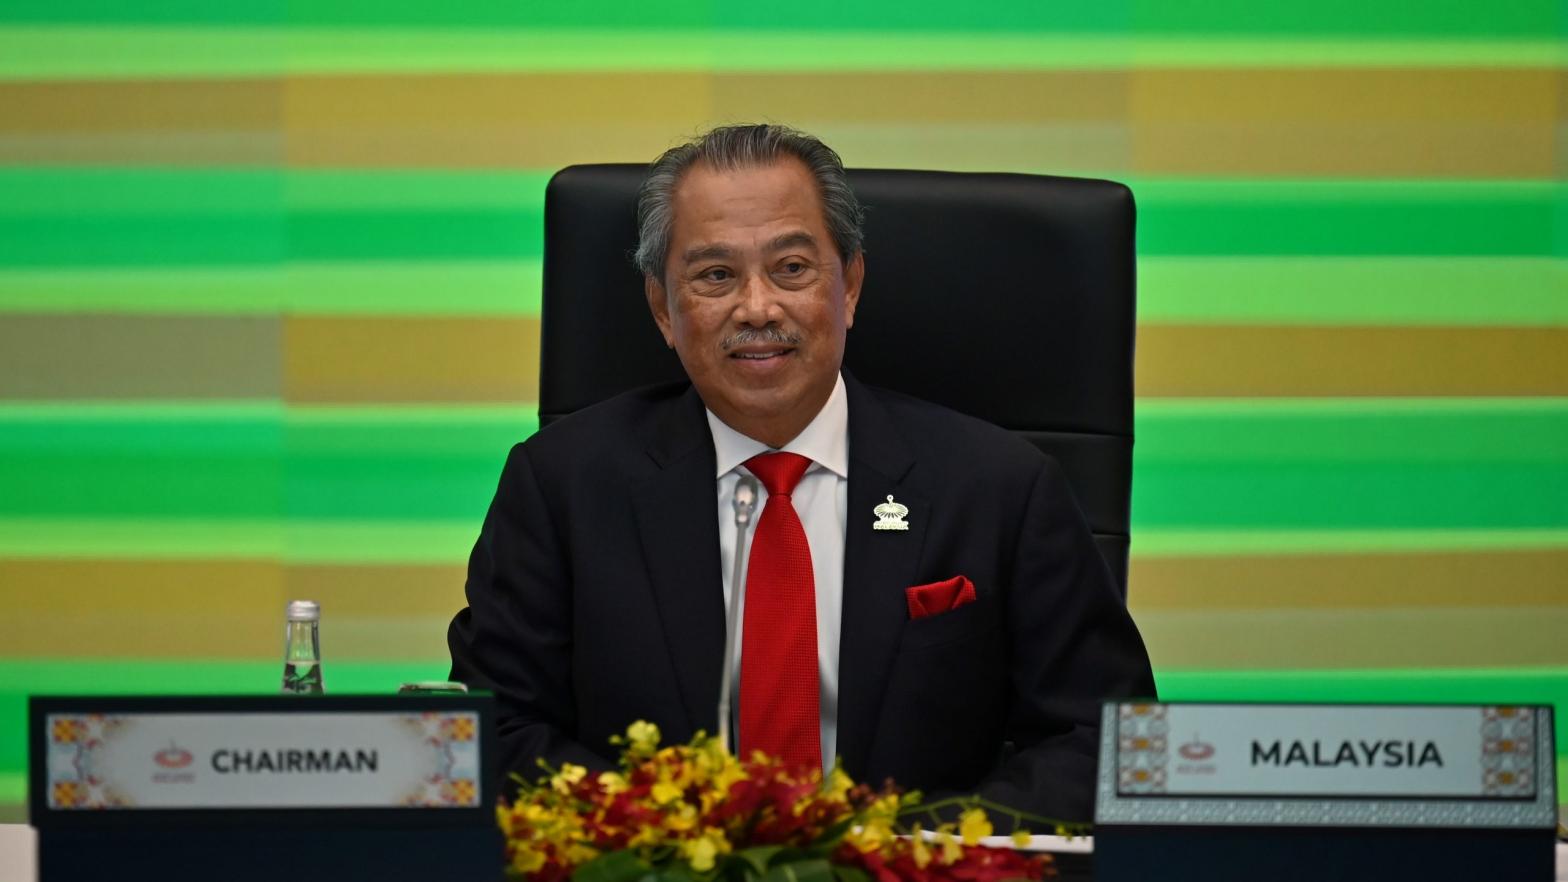 Malaysia's Prime Minister Muhyiddin Yassin takes part in the online Asia-Pacific Economic Cooperation (APEC) leaders' summit in Kuala Lumpur on November 20, 2020. (Photo: Mohd Rasfan/AFP, Getty Images)